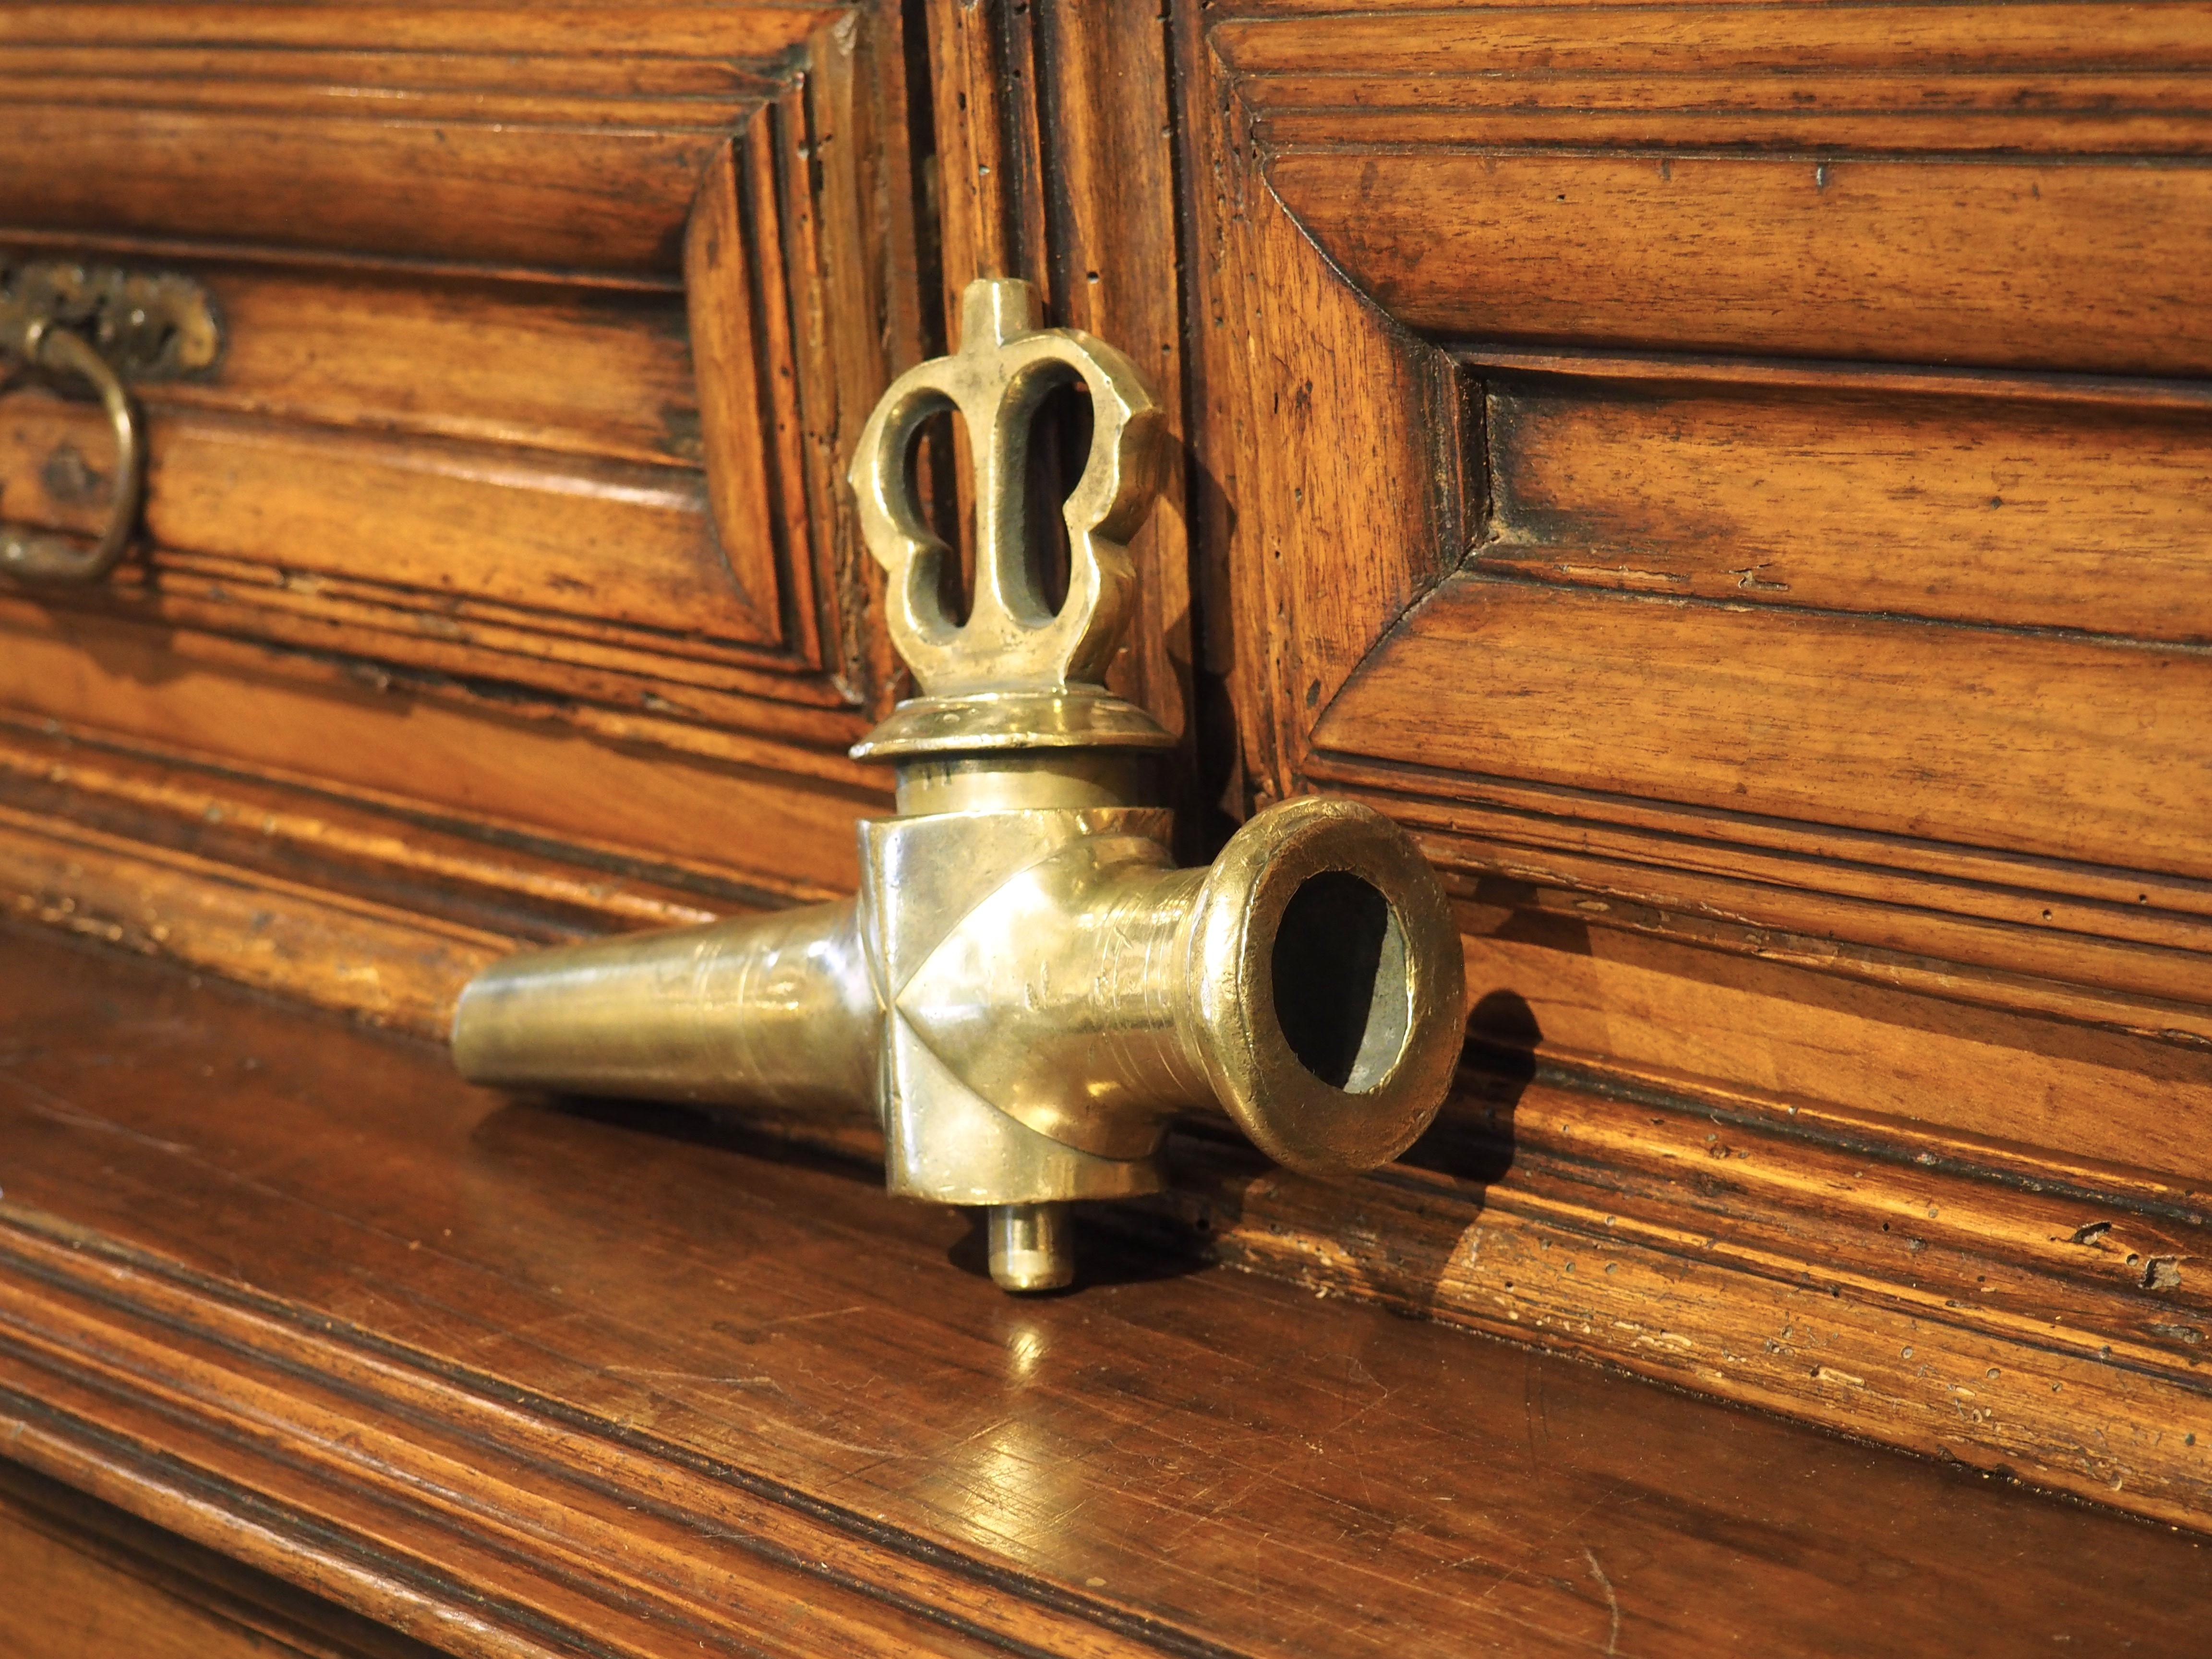 Originally a spout for a French wine barrel, this polished bronze spout has a pierced turn valve resembling a butterfly. The spout, which dates to the 1800s, is also embellished with several thin rings of fluting on the horizontal pipe and geometric